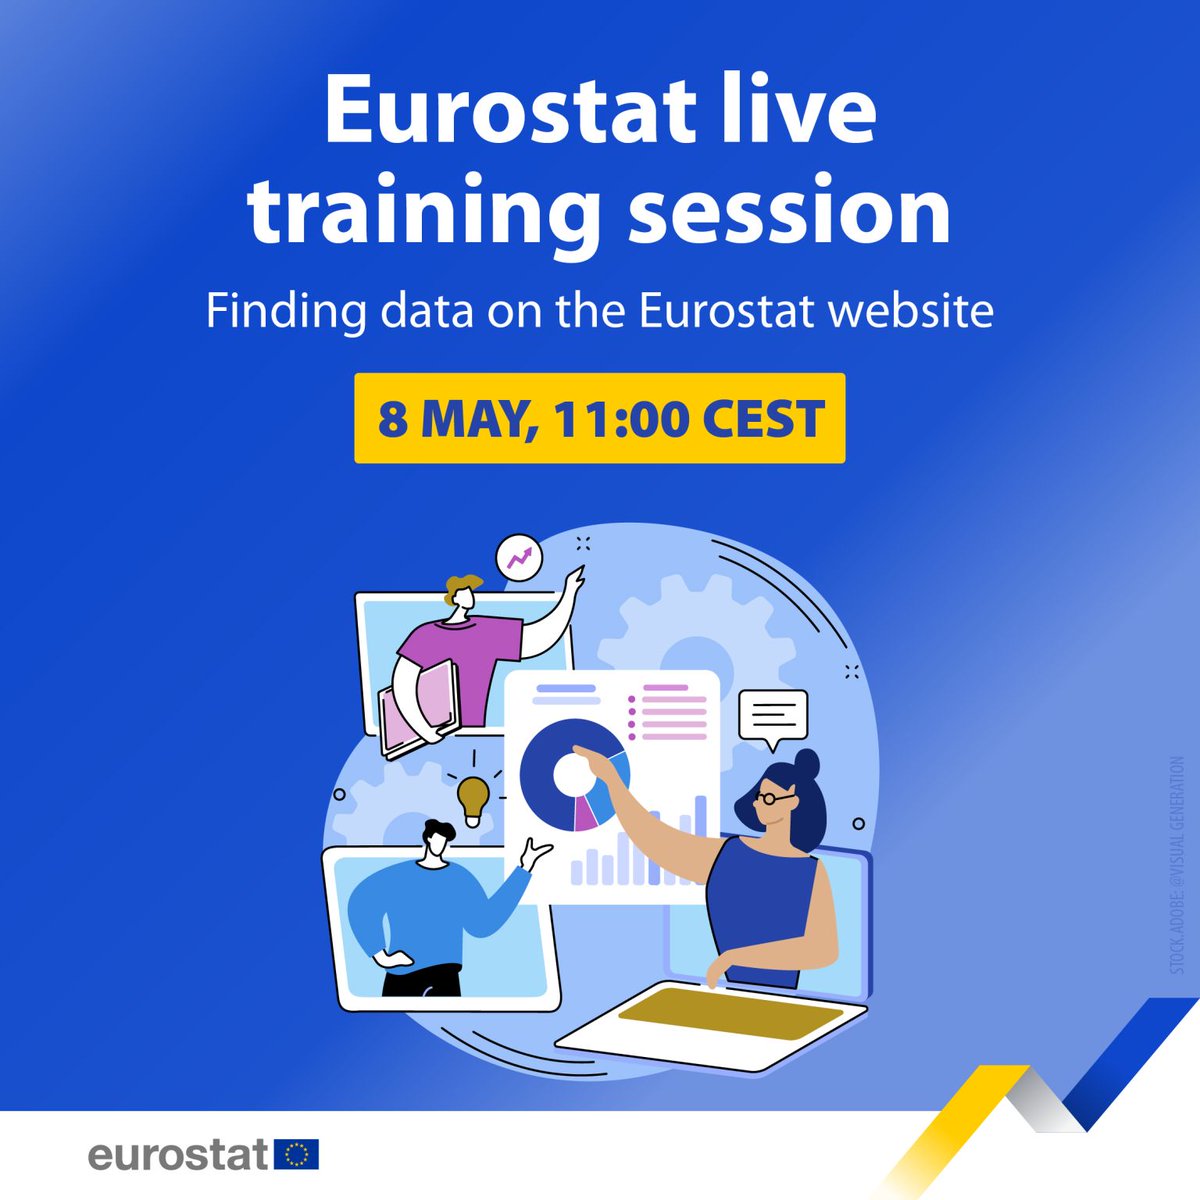 WEBINAR: Eurostat live training session⁠ 📊🖥️ Learn about the features of Eurostat's website and how to locate and access data.⁠ 🗓️ 8 May, 11:00 – 12:30 CEST⁠ ⁠Register here ➡️ europa.eu/!vb6kKV ⁠Registration will close on 7 May at 16:00 CEST❗⁠